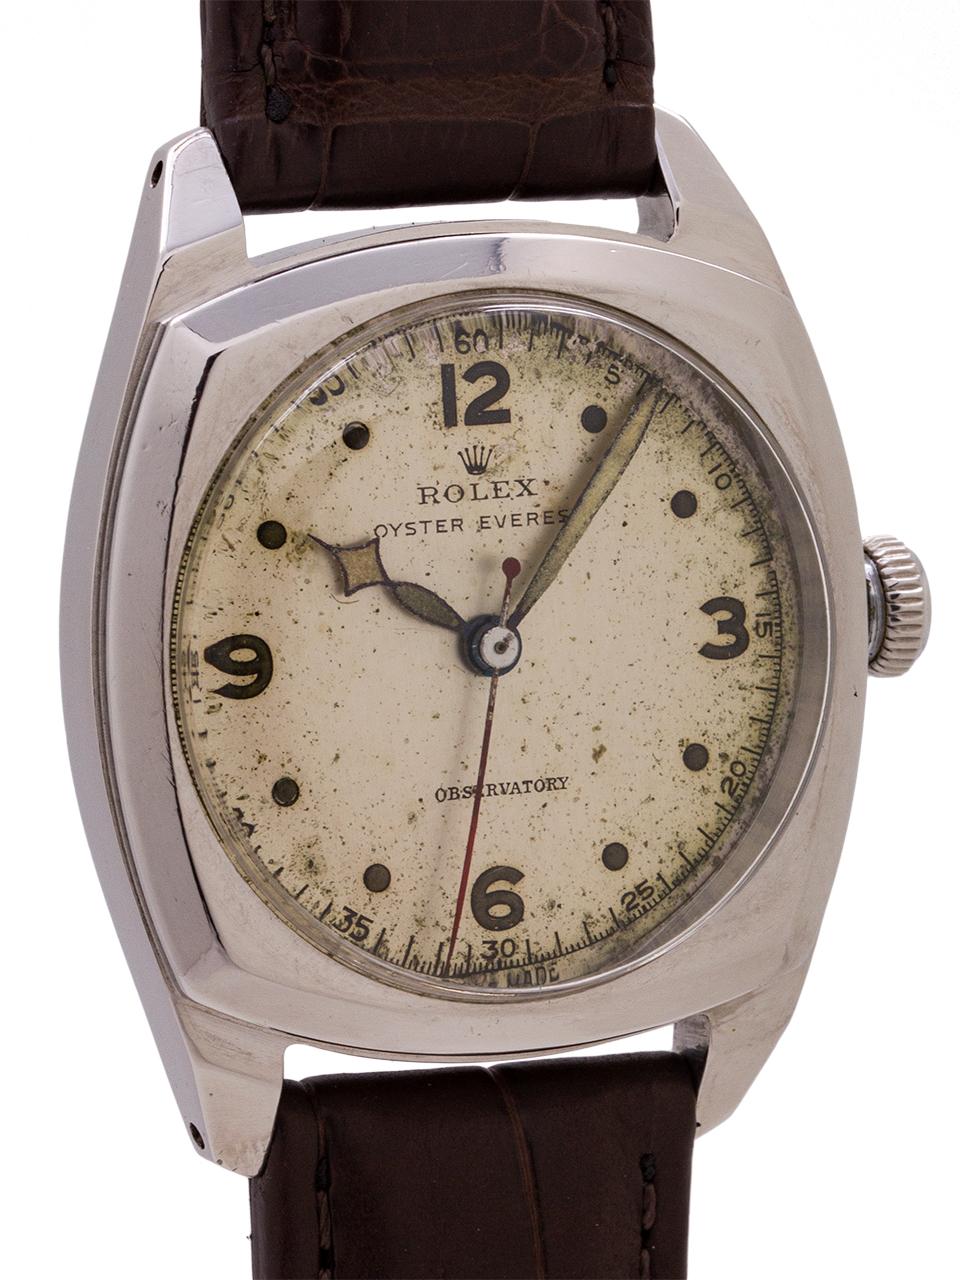 
Scarce model vintage Rolex Oyster Everest Observatory model ref 4647 circa 1940’s. Featuring a 30 x 35mm thick cushion shaped Oyster case with side flat bezel with sloped sides, heavy faceted lugs, and screw down case back and period screw down